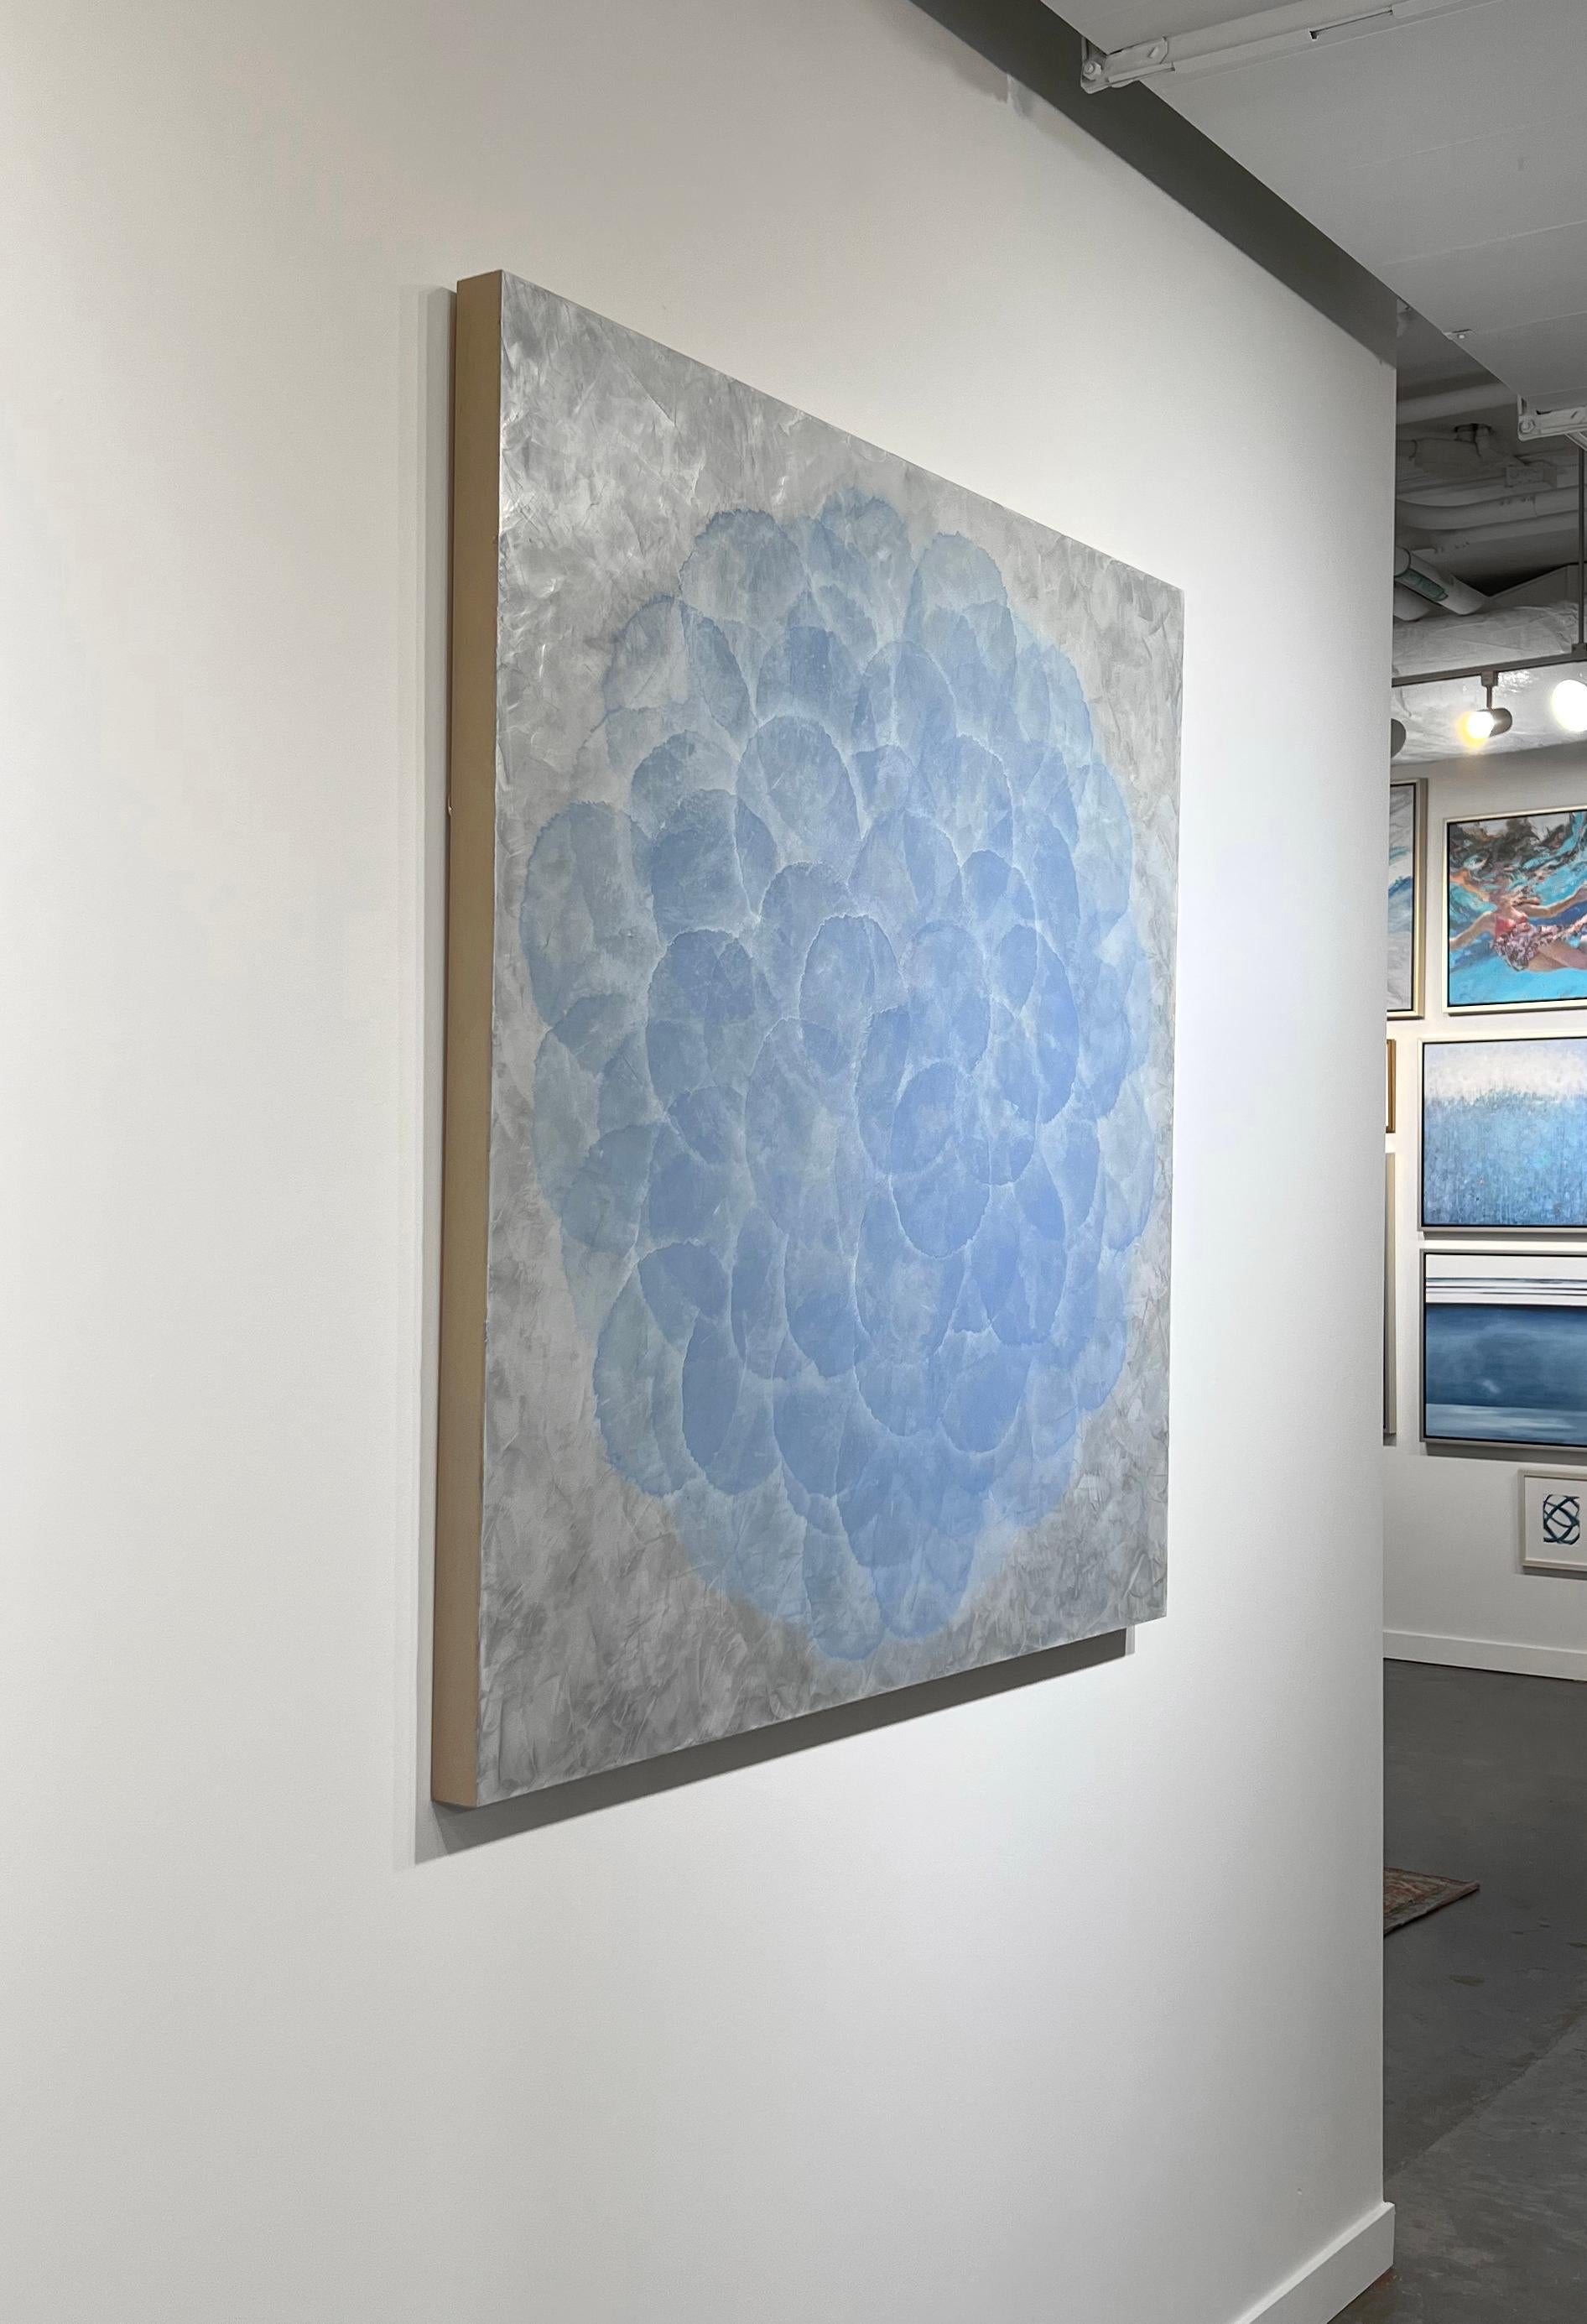 This abstract painting by Roger Mudre is made with acrylic paint over metal leaf on panel. It features nearly opaque light blue circles, arranged in an overlapping pattern to create a larger circle shape. The outer layer of the circle blends into